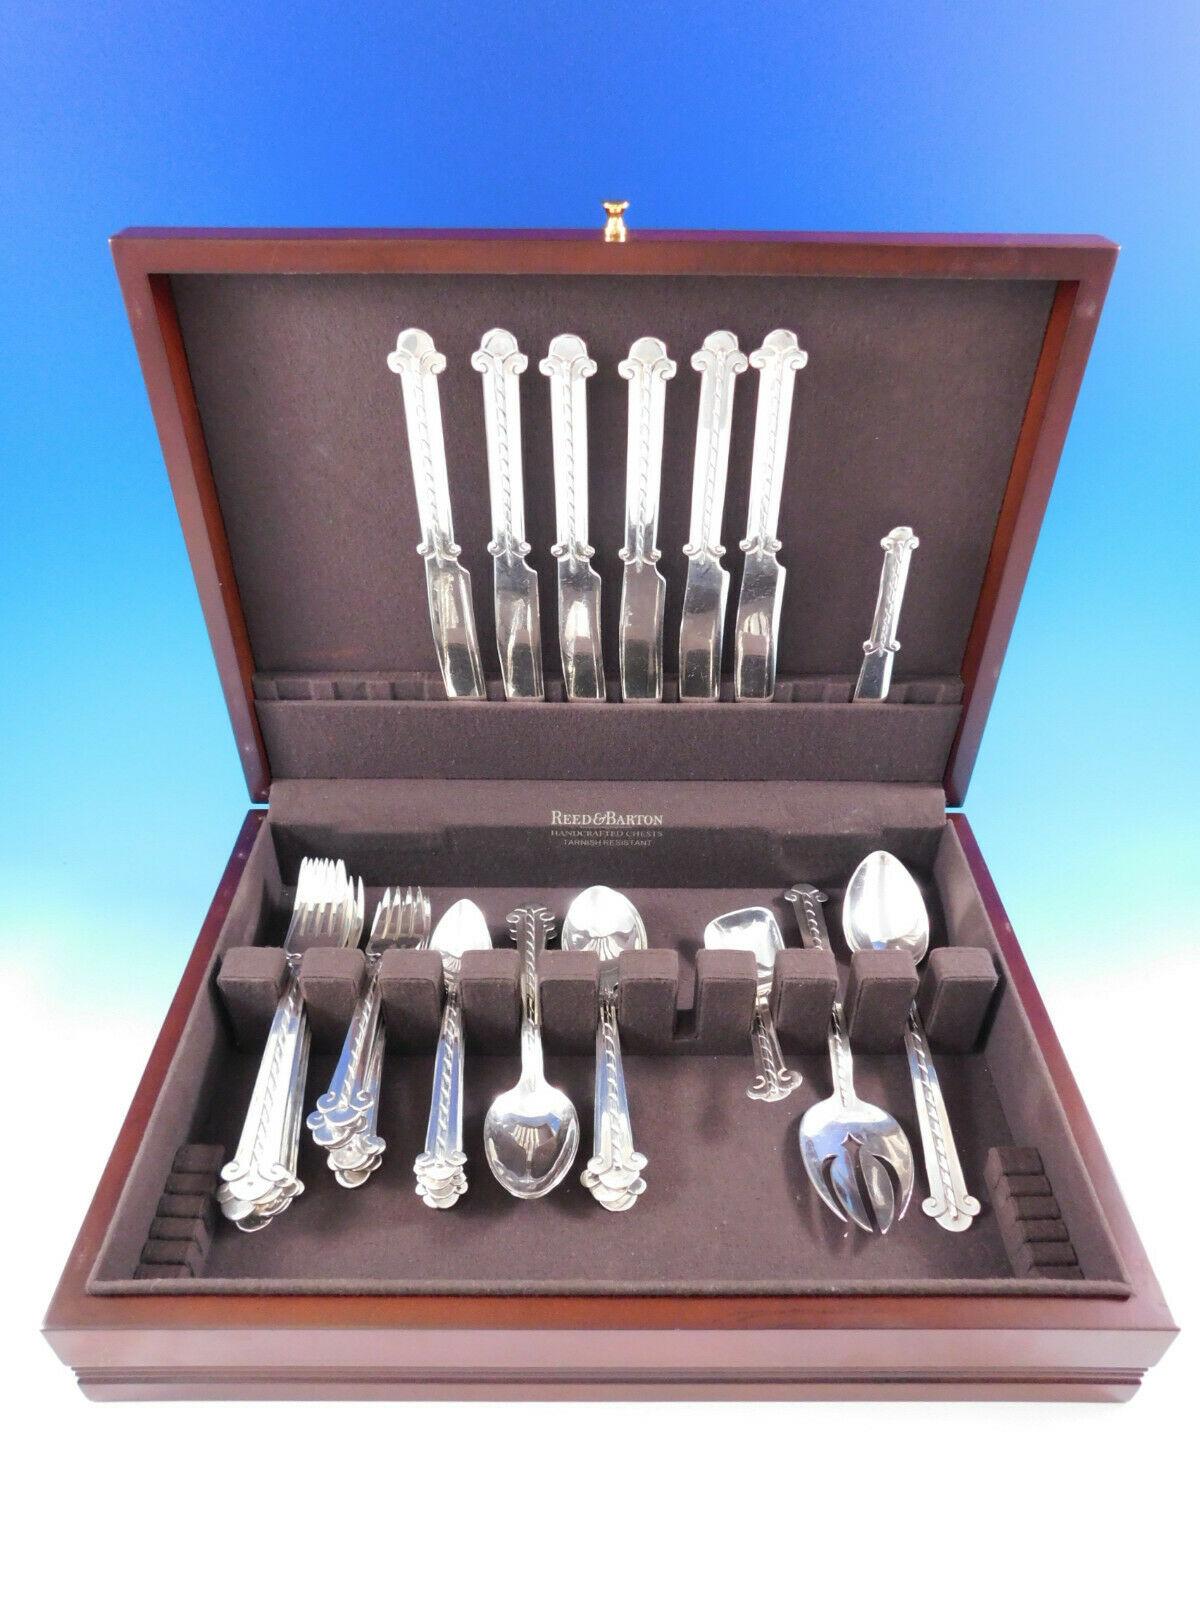 Hector Aguilar

Exceedingly rare set of circa 1949-1962 sterling silver flatware by Hector Aguilar, Taxco, Mexico in the scarce “Rope” pattern, handles decorated with a rope motif running from the trefoil bottoms to the necks. Hector Aguilar